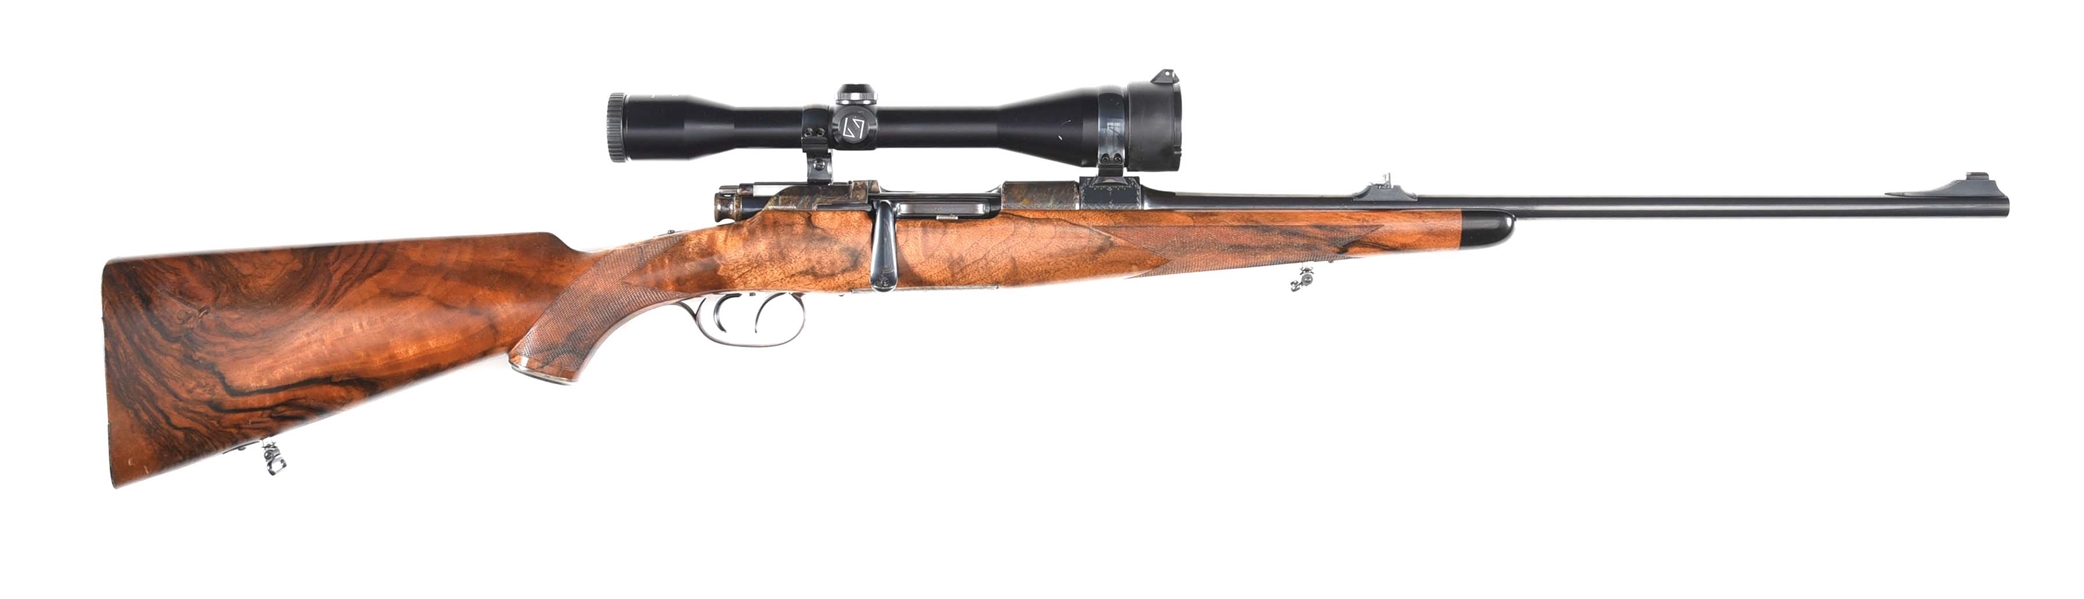 (M) FERNAND MARC CORMAN BEST QUALITY BOLT ACTION RIFLE WITH ZEISS GLASS.